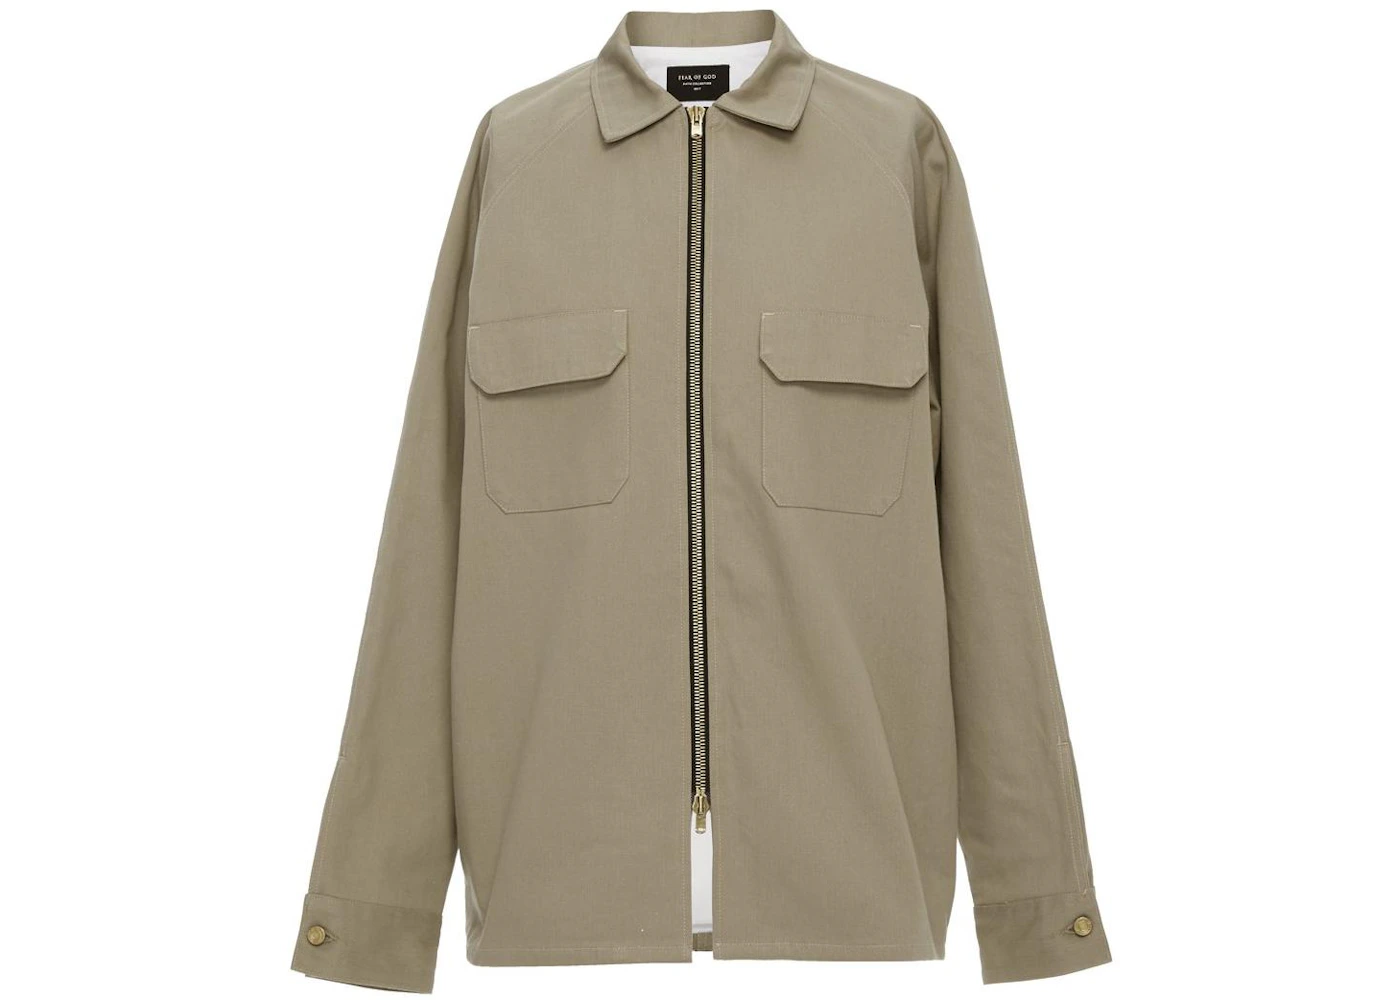 FEAR OF GOD Chino Workshirt Shirt Khaki Men's - Fifth Collection - US